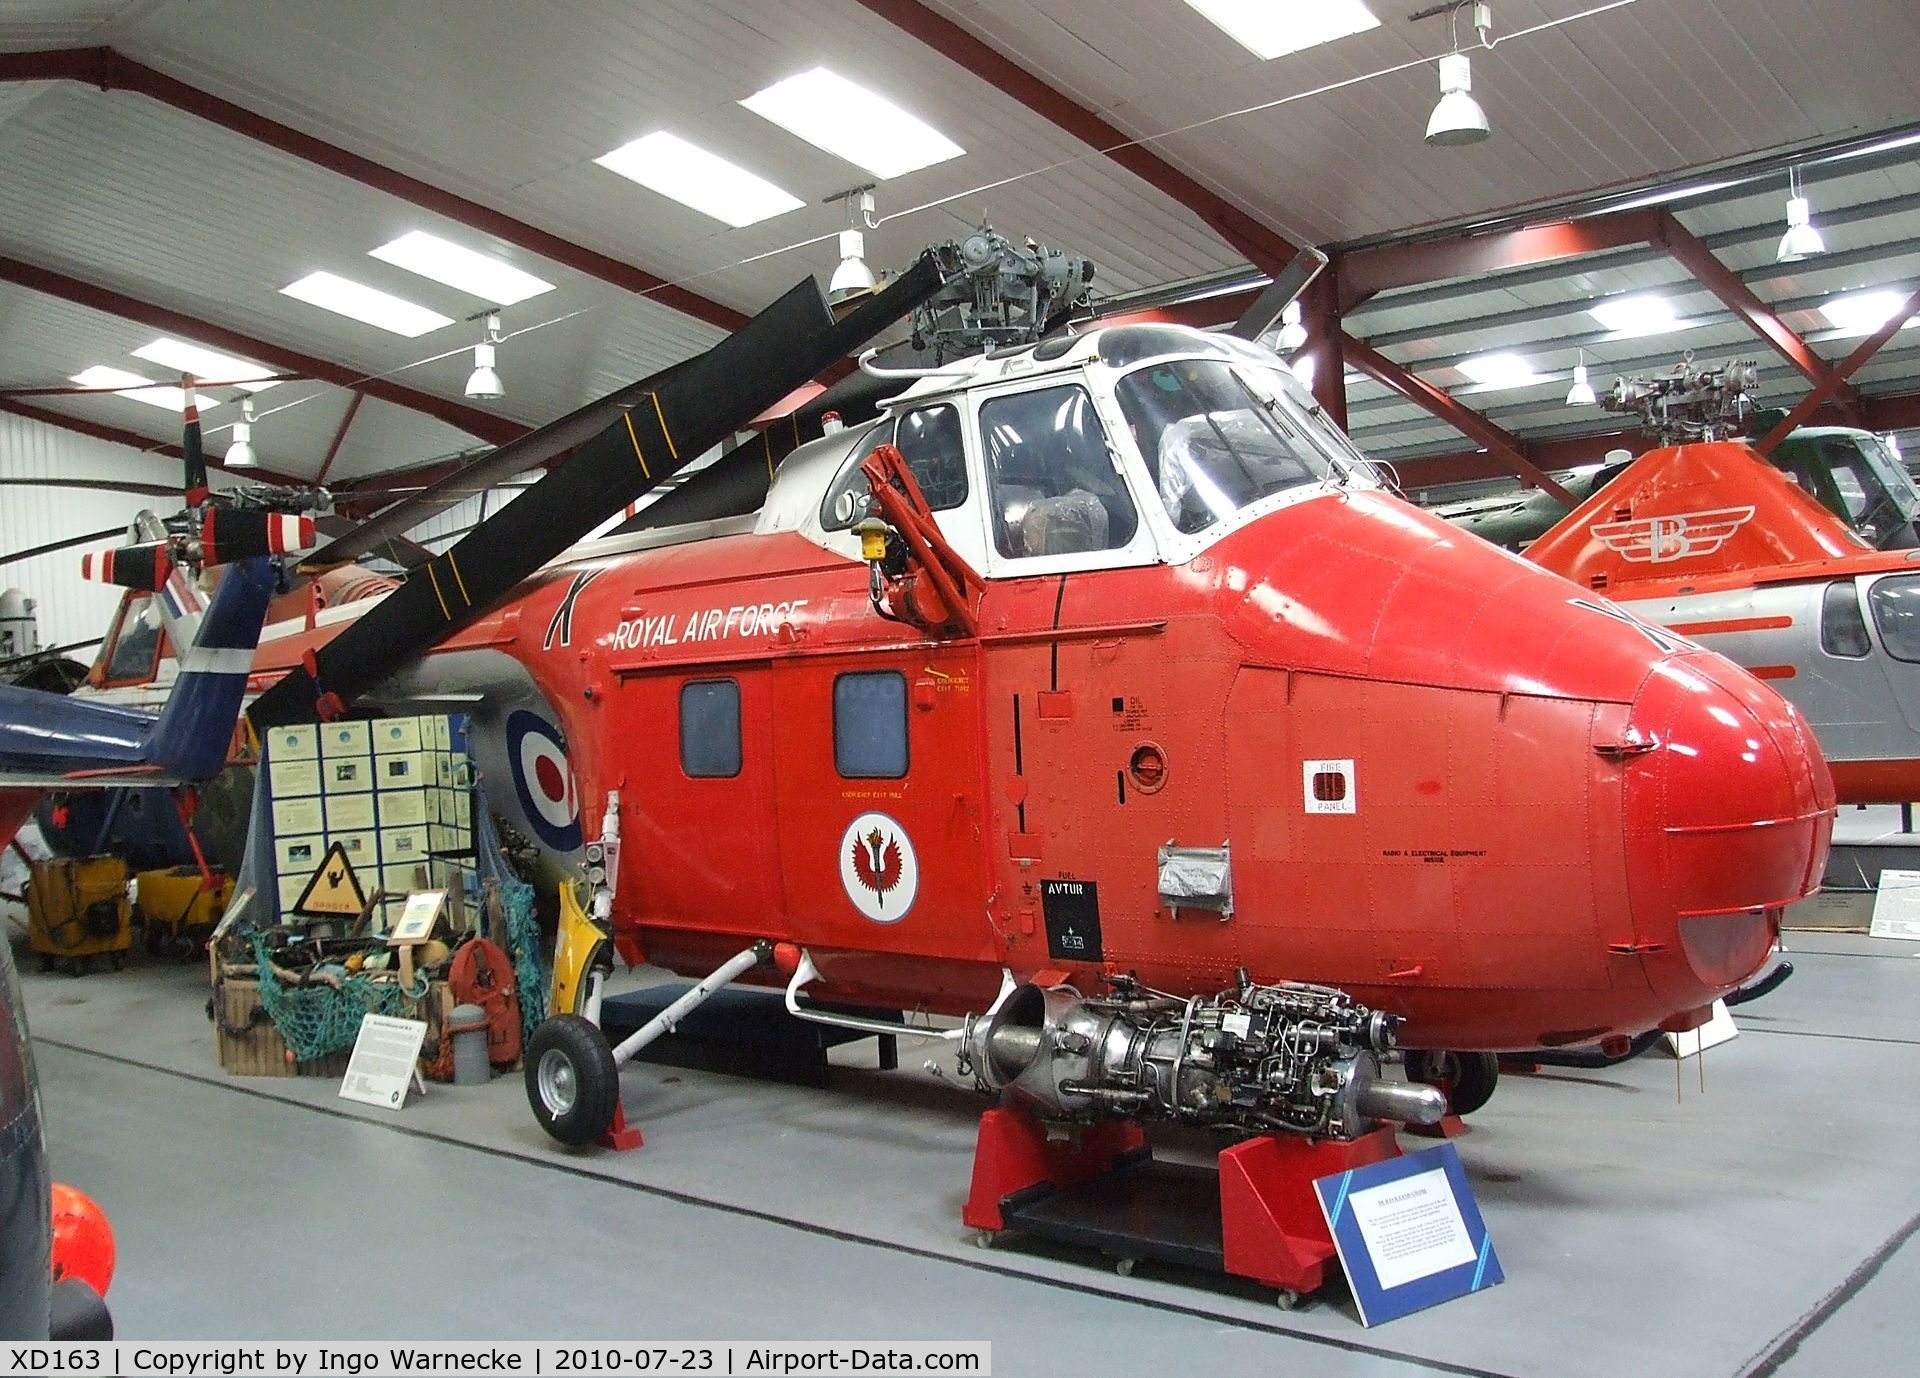 XD163, 1954 Westland Whirlwind HAR.10 C/N WA20, Westland Whirlwind HAR10 at the Helicopter Museum, Weston-super-Mare